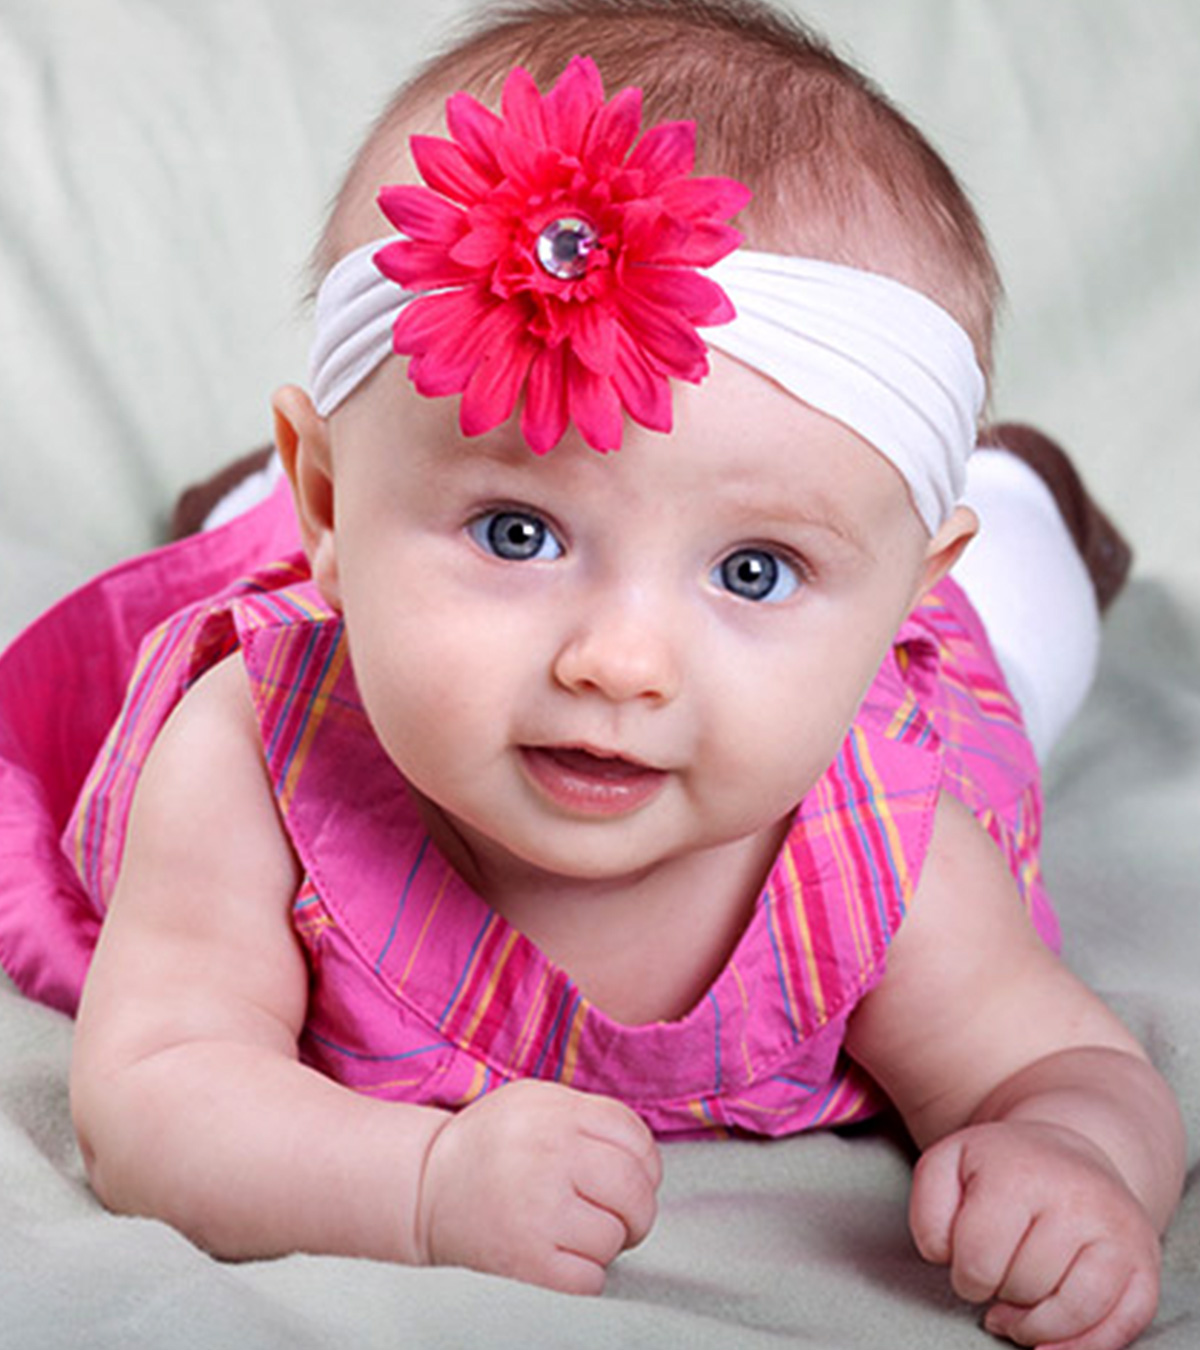 Incredible Compilation of Baby Girl Images in Full 4K Resolution - Over ...